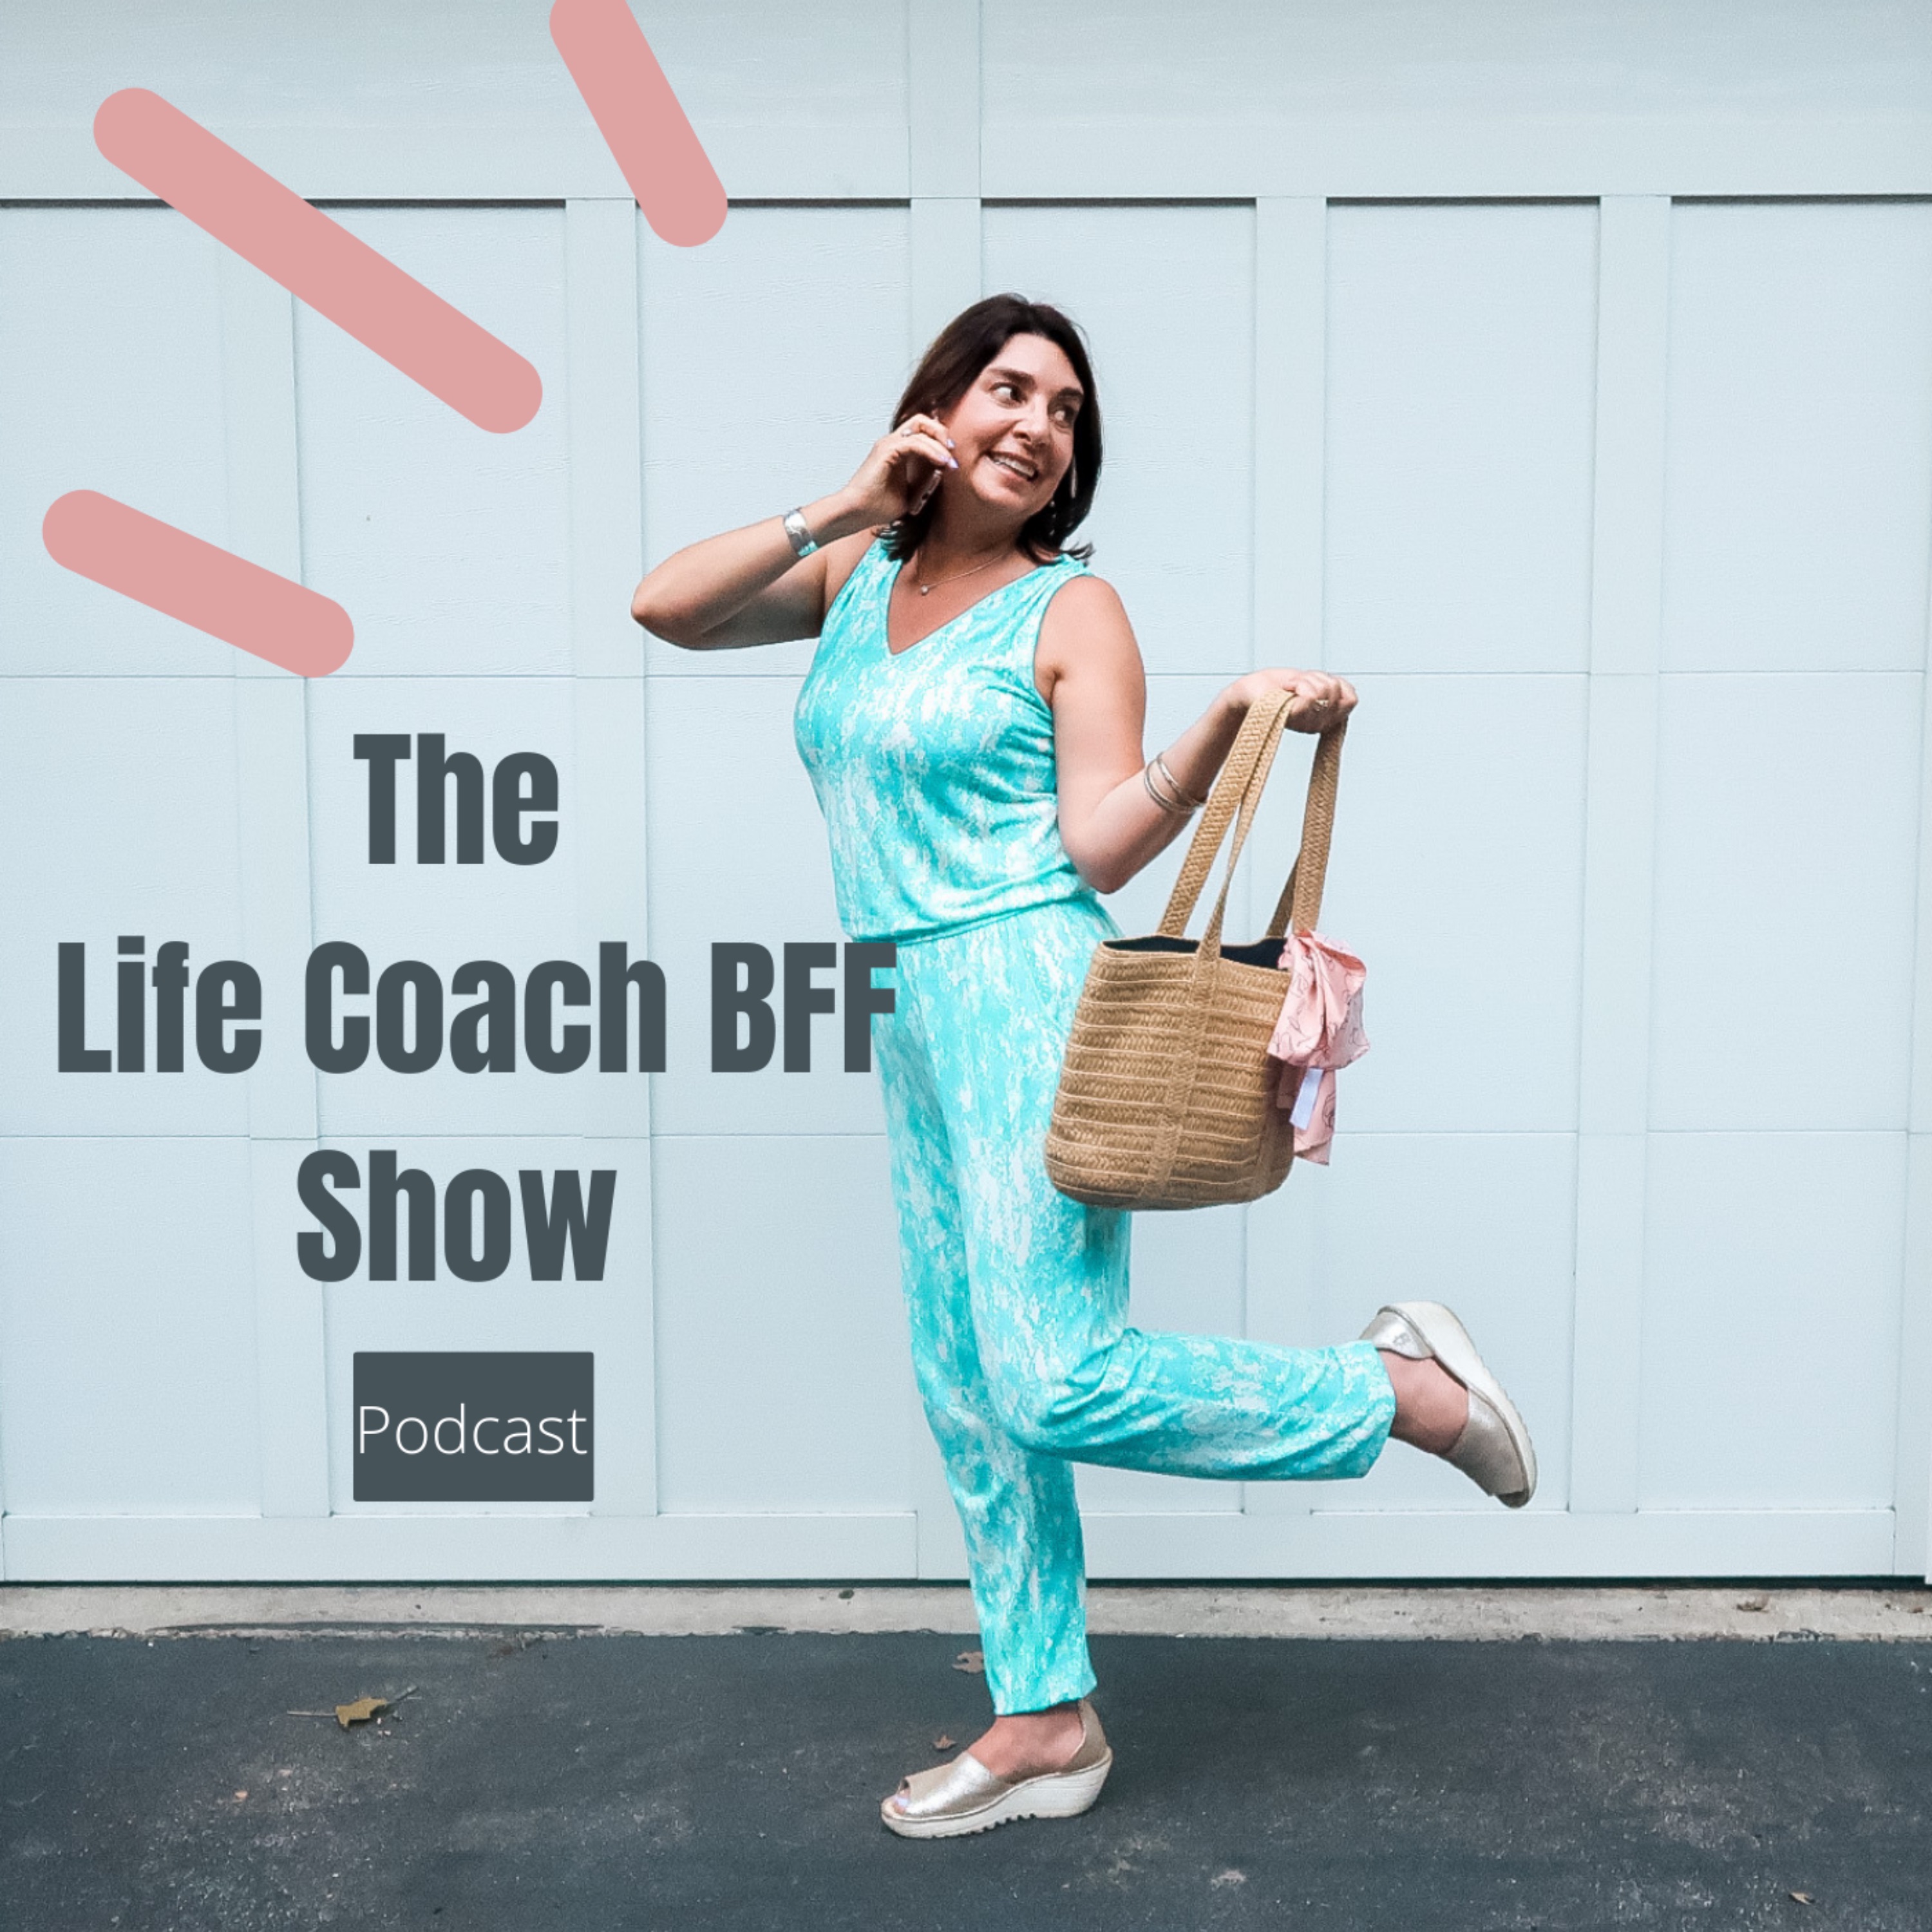 Life Coach BFF Show - Parenting Teens, Marital Issues, Christian Faith, Easy Meals, Mental Health Issues with Teens